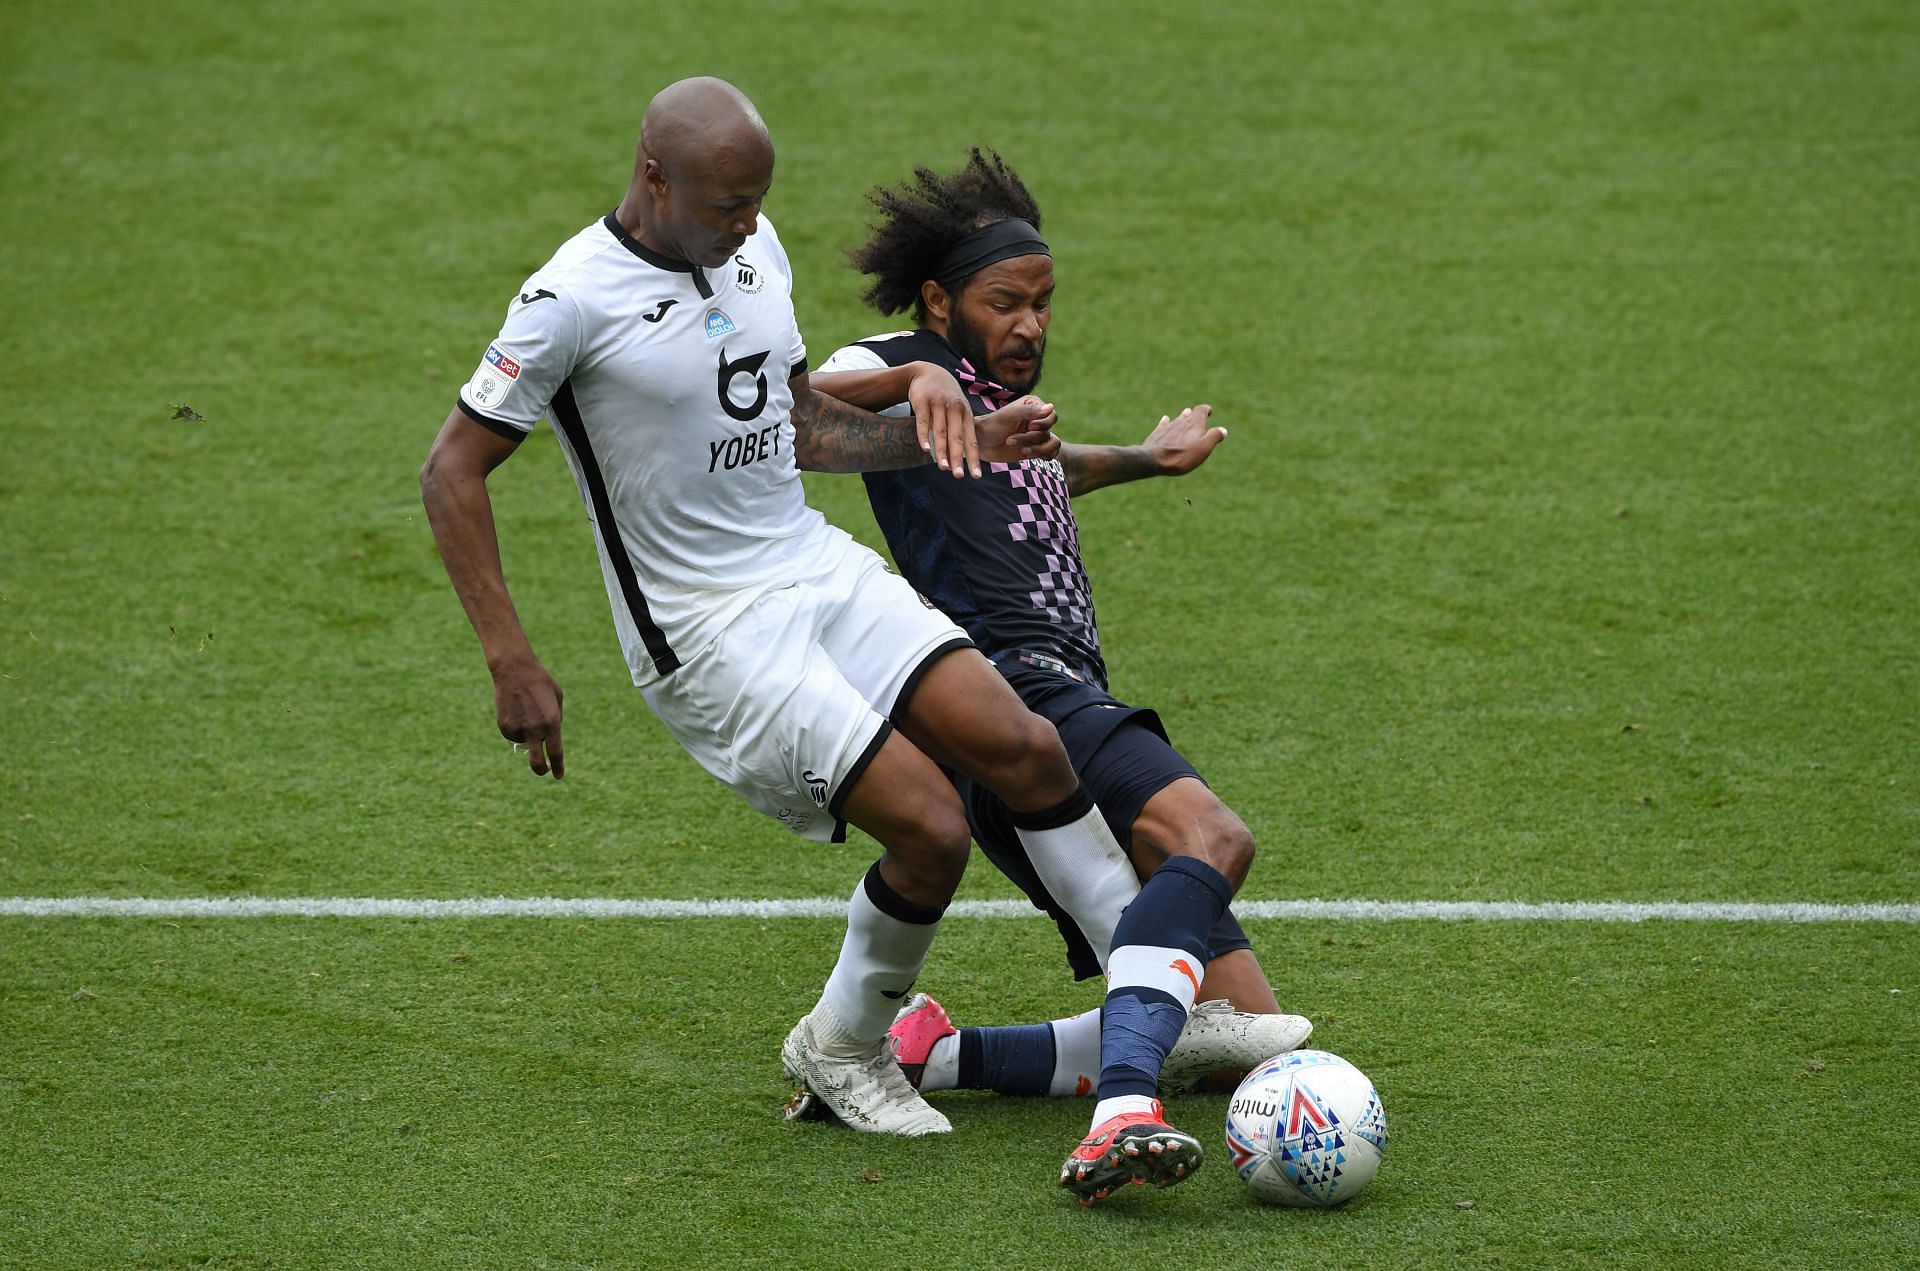 Swansea City play host to Luton Town at the Swansea.com Stadium on Tuesday